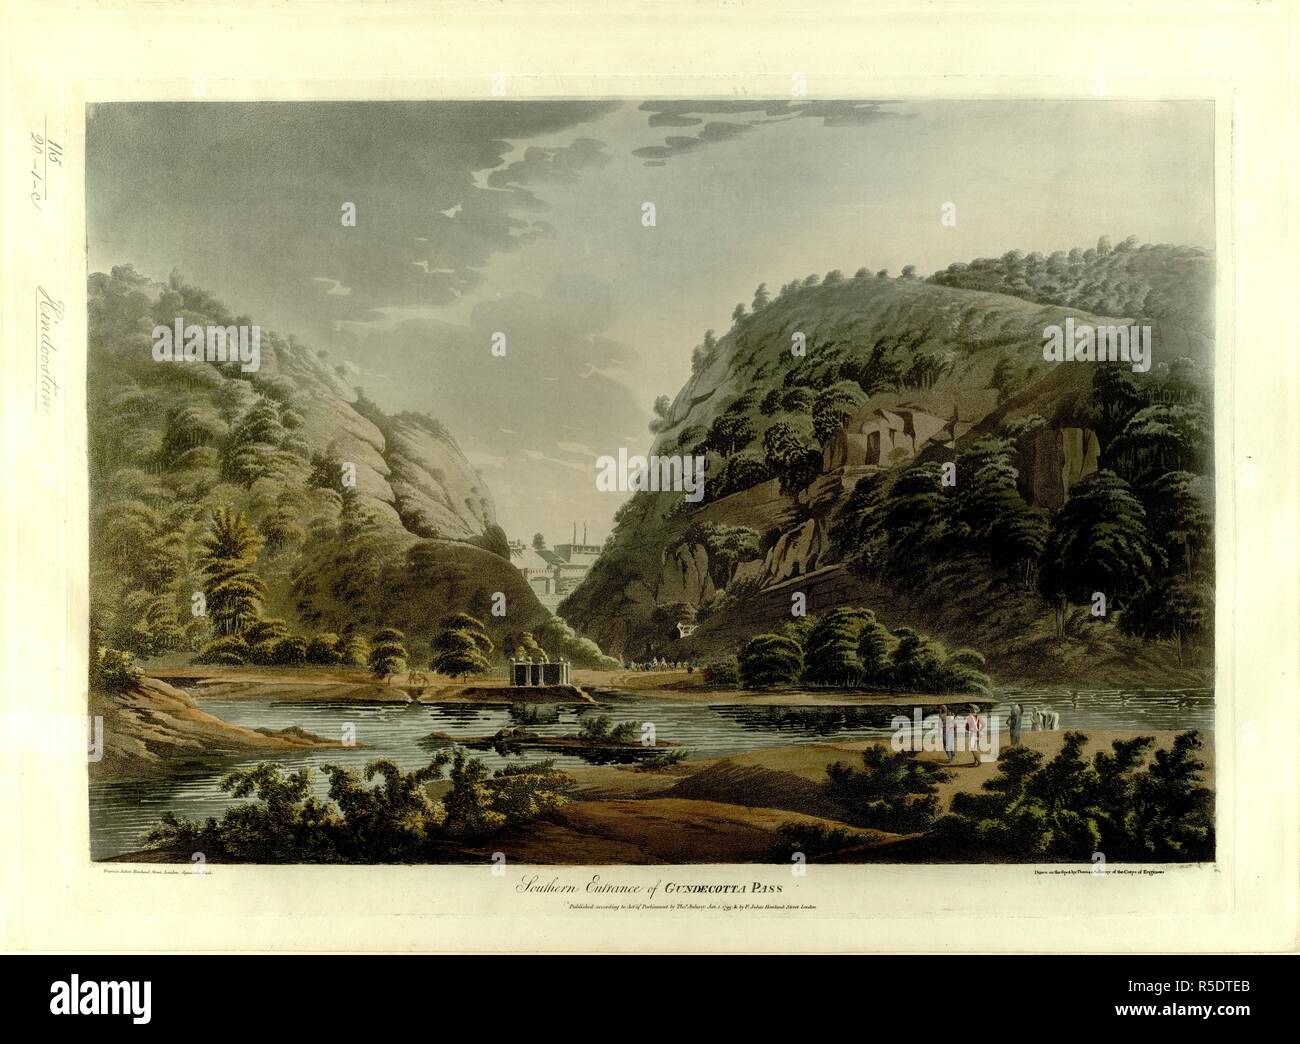 Gandikotta Pass, on the Pennar River; a landscape with steep, tree-covered hills; rocks on either side; figures riding through a cut between the rocks, towards buildings in the background; buildings in the distance. Southern Entrance of GUNDECOTTA PASS. [London] ; [Bengal] : Published according to Act of Parliament Jan 1st 1799 by Thos. Anburey Bengal & by F. Jukes, Howland Street London, [January 1 1799]. Source: Maps K.Top.115.20.1.c. Stock Photo